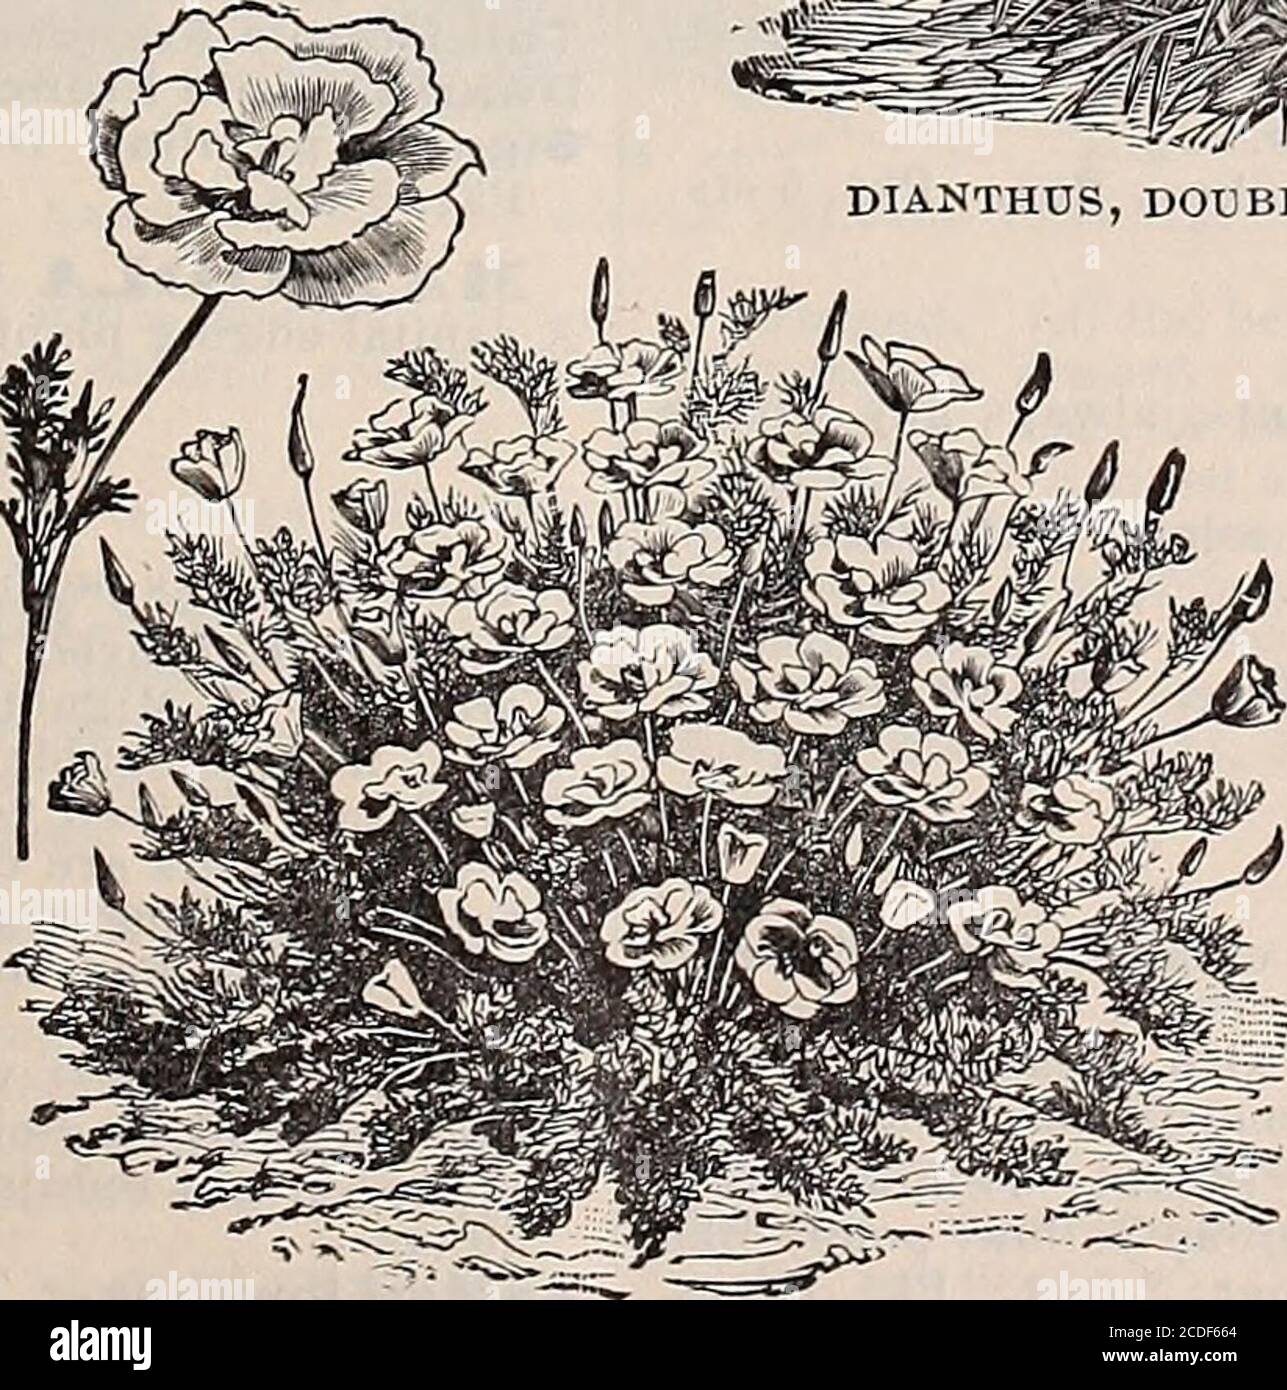 . Beckert's garden field and flower seeds . rf and branching. Fine mixed. Pkt.5 cts. Monstrosum. Large and very doubleflowers! Pkt. 5 cts.COMPHRENA globosa (Bachelors But-ton). Round flower-heads of red orwhite. Mixed. Pkt. 5 cts.RHODANTHE, Fine Mixed. The mostdelicately beautiful of all Everlastings.1 foot. Pkt. 5 cts.XERANTHEMUM. Bright, double, globe-shaped flowers. Mixed. Pkt. 5 cts.Special offer of Everlastings — 1 packet each, of8 varieties, 30 cents FEVERFEW, Double White (Matricaria). For cutting and pot culture as wellas for beds and borders. Thrives in all soils; blooms until frost. Stock Photo